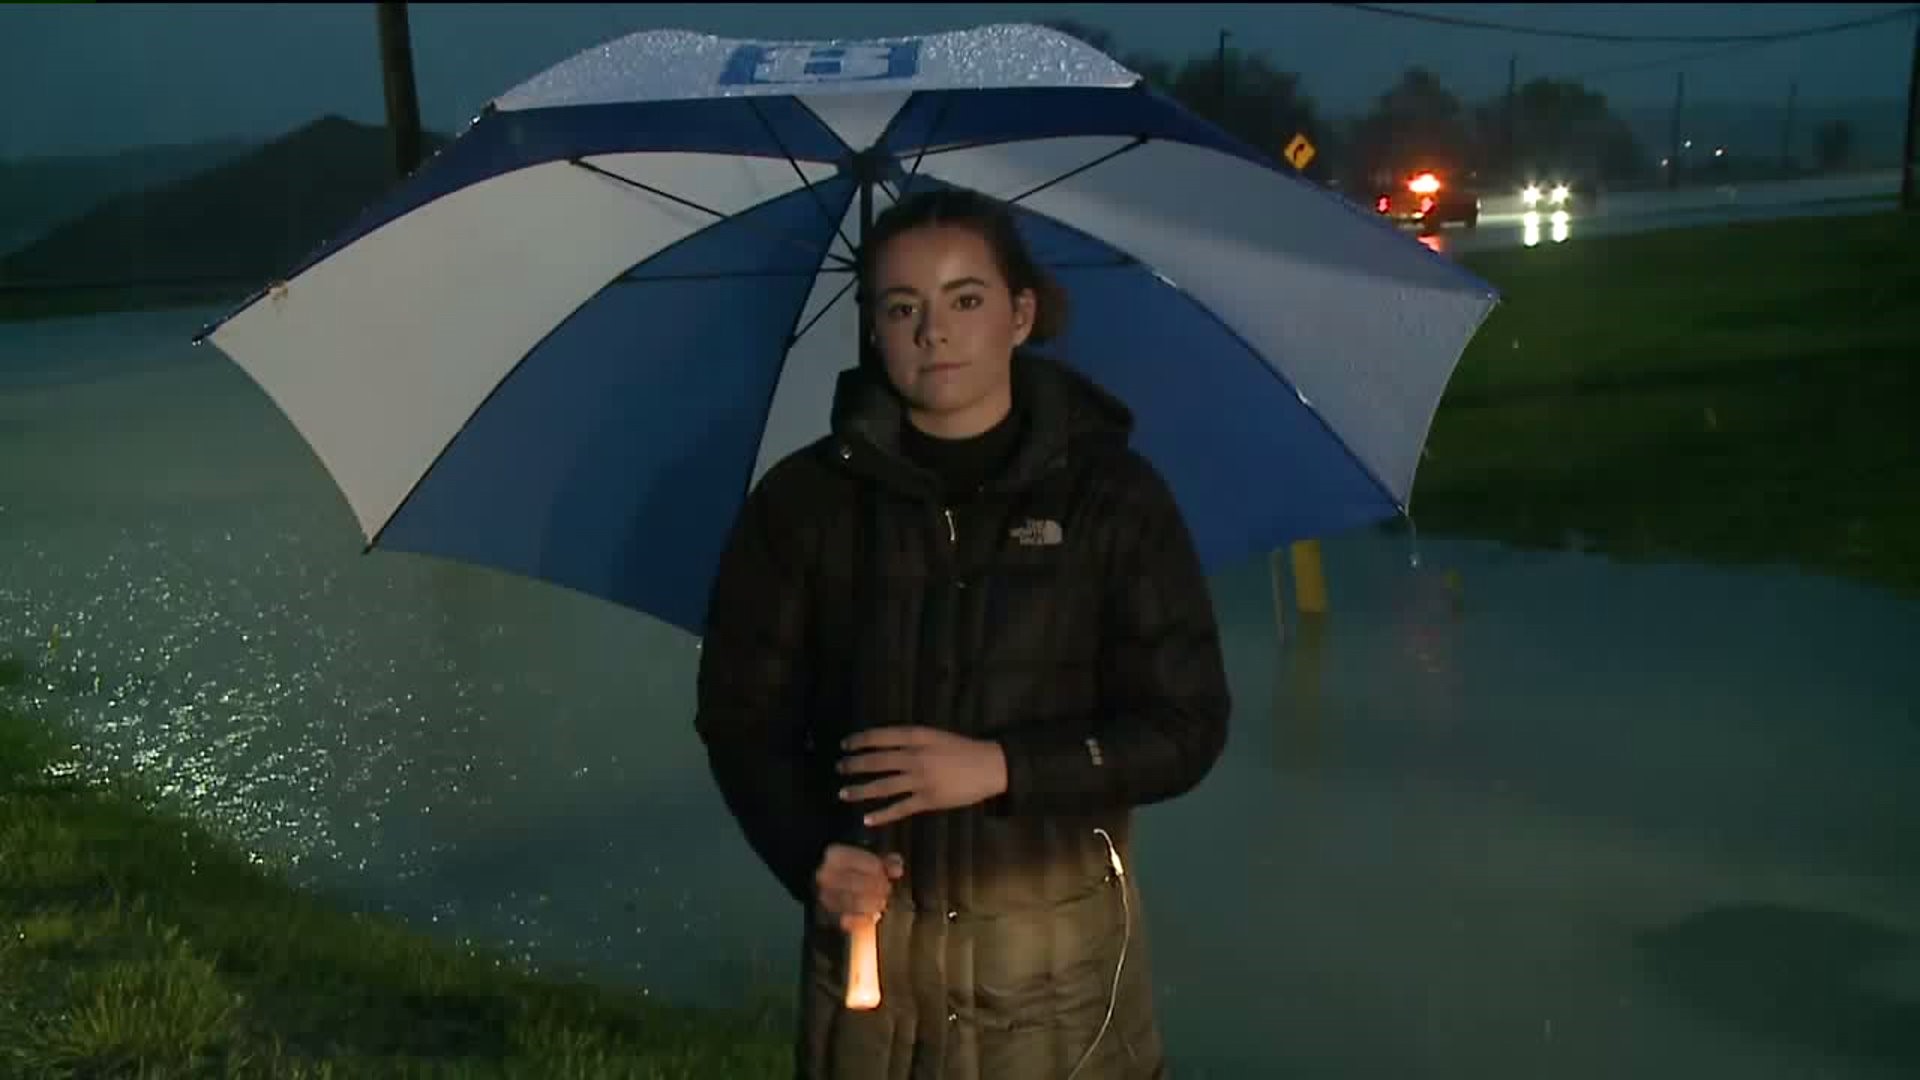 Madison Conner reports live from the flood zone in LeClaire